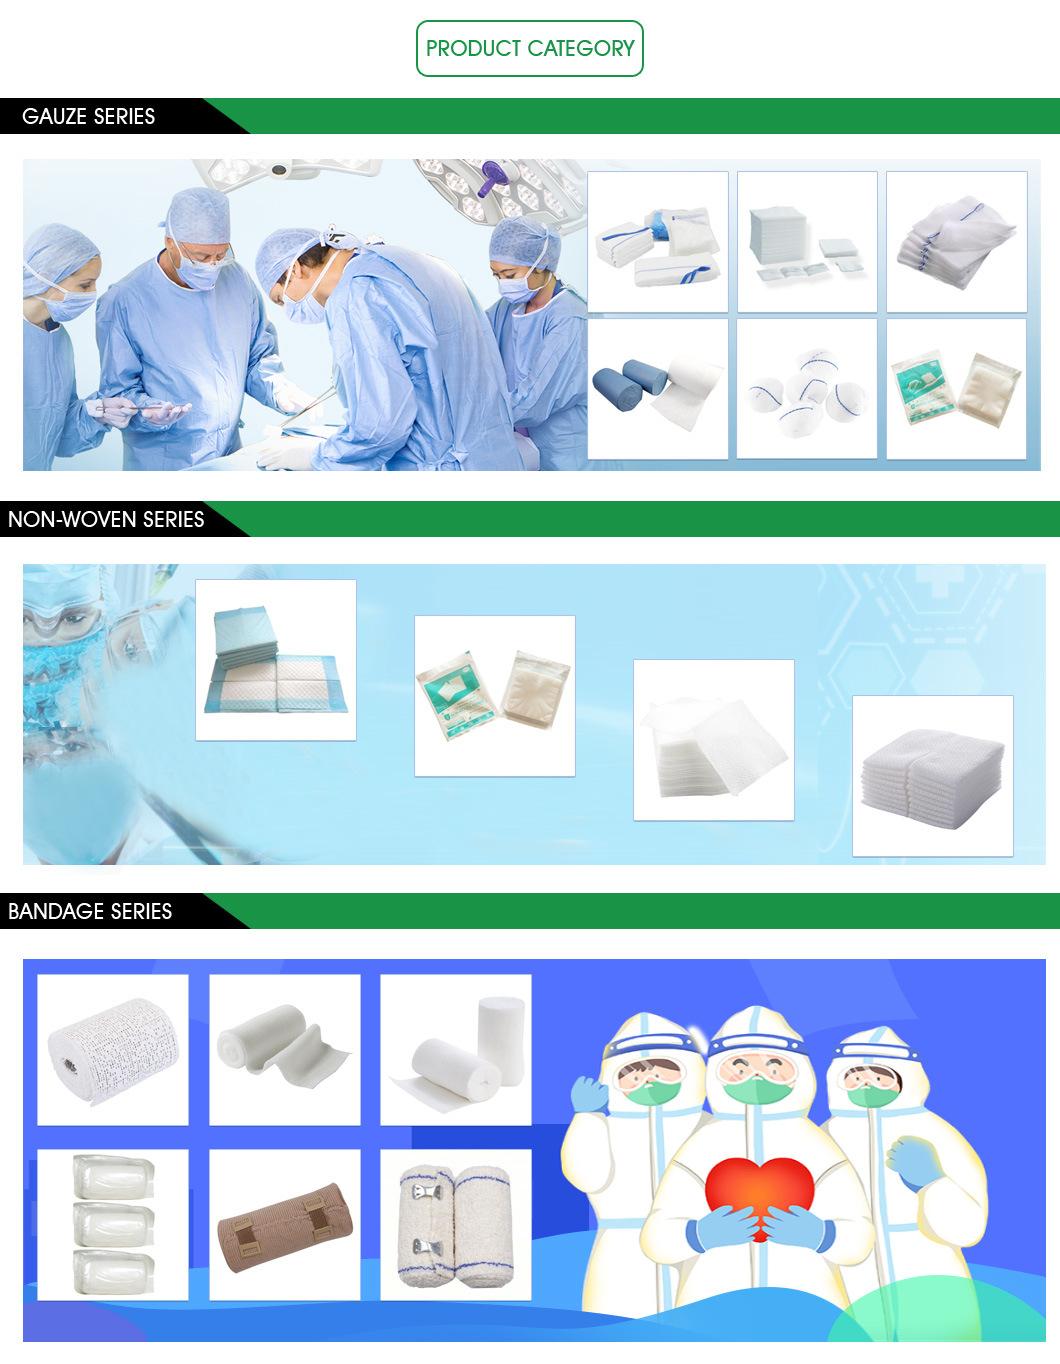 2020 Best Selling China Cheap Sterile Medical 70% Isopropyl Non-Woven Alcohol Pad